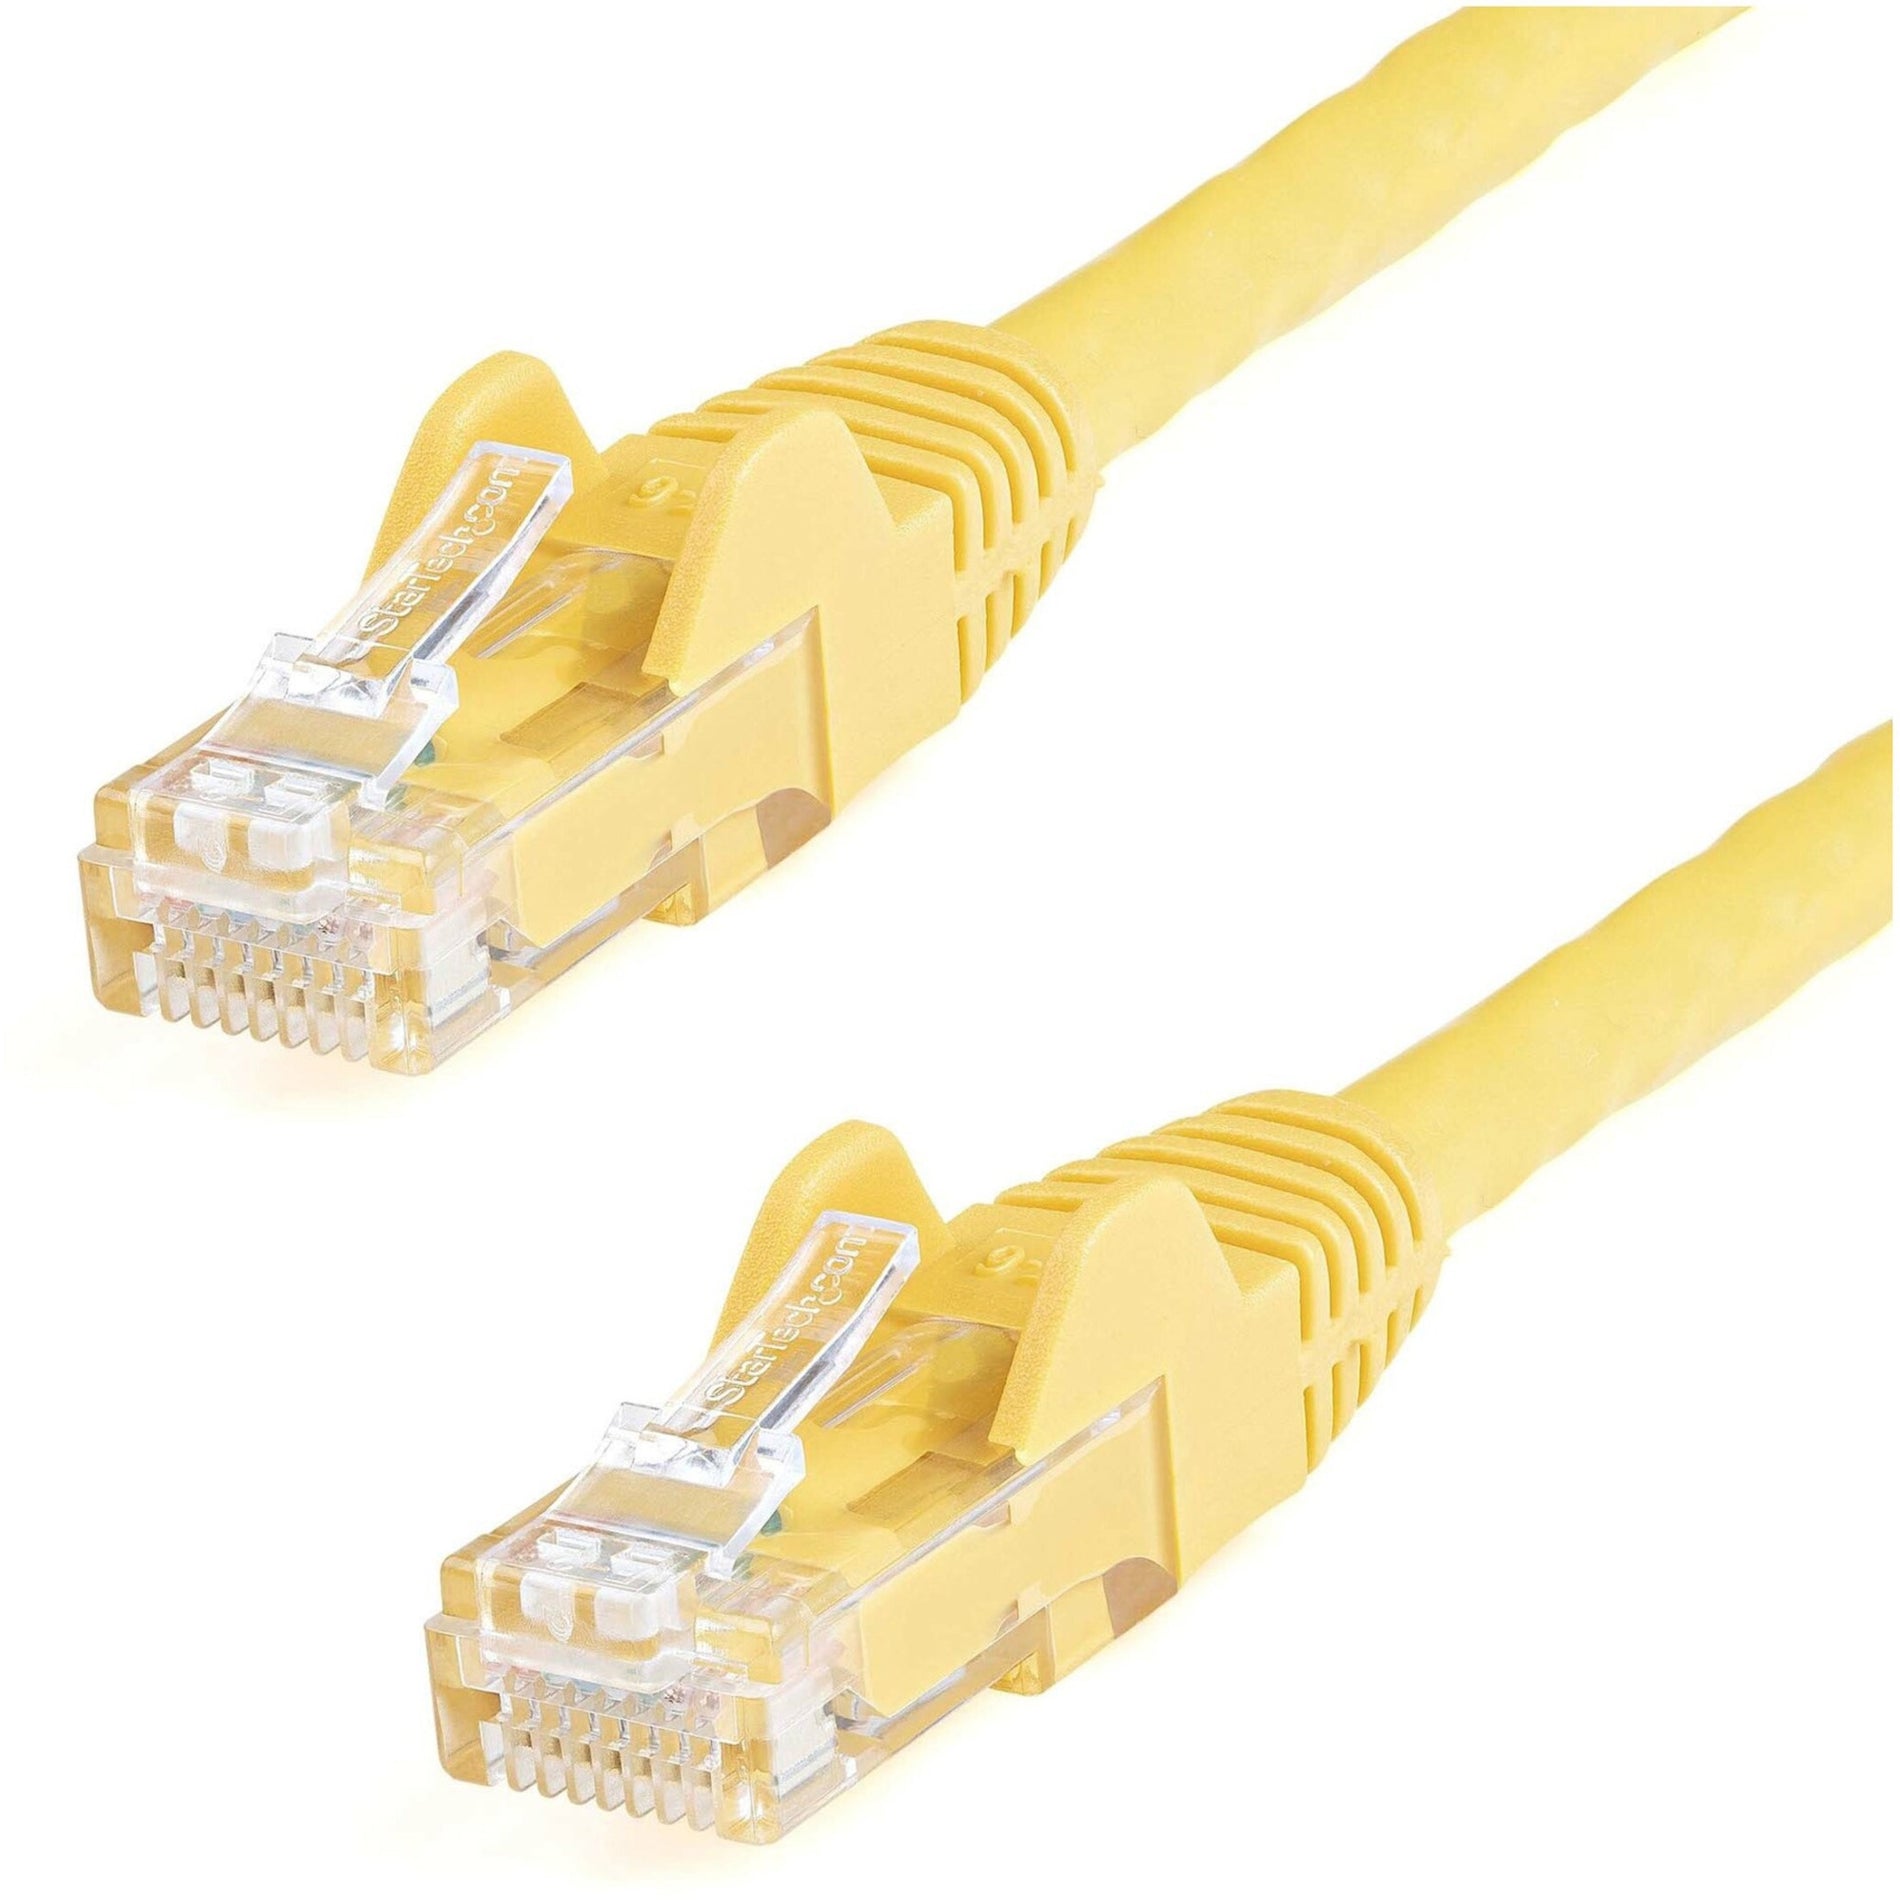 StarTech.com N6PATCH6YL Cat6 Patch Cable, 6 ft Yellow Ethernet Cable, Snagless RJ45 Connectors